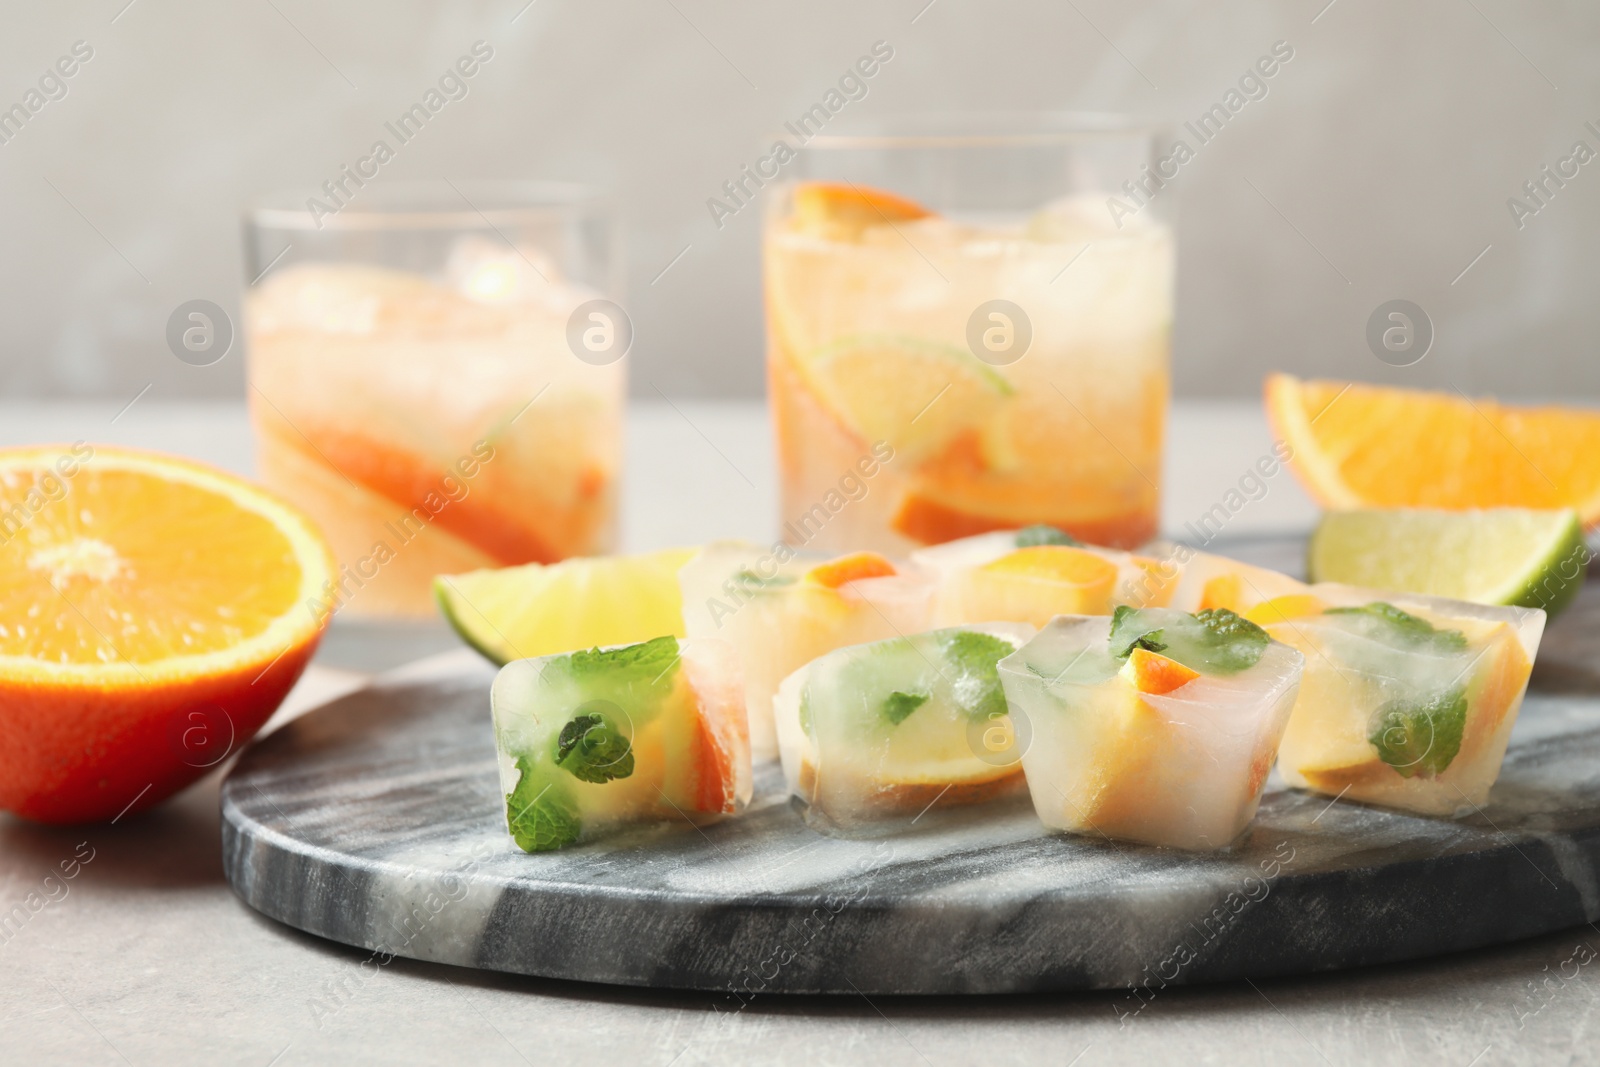 Photo of Ice cubes with orange and mint on light grey table